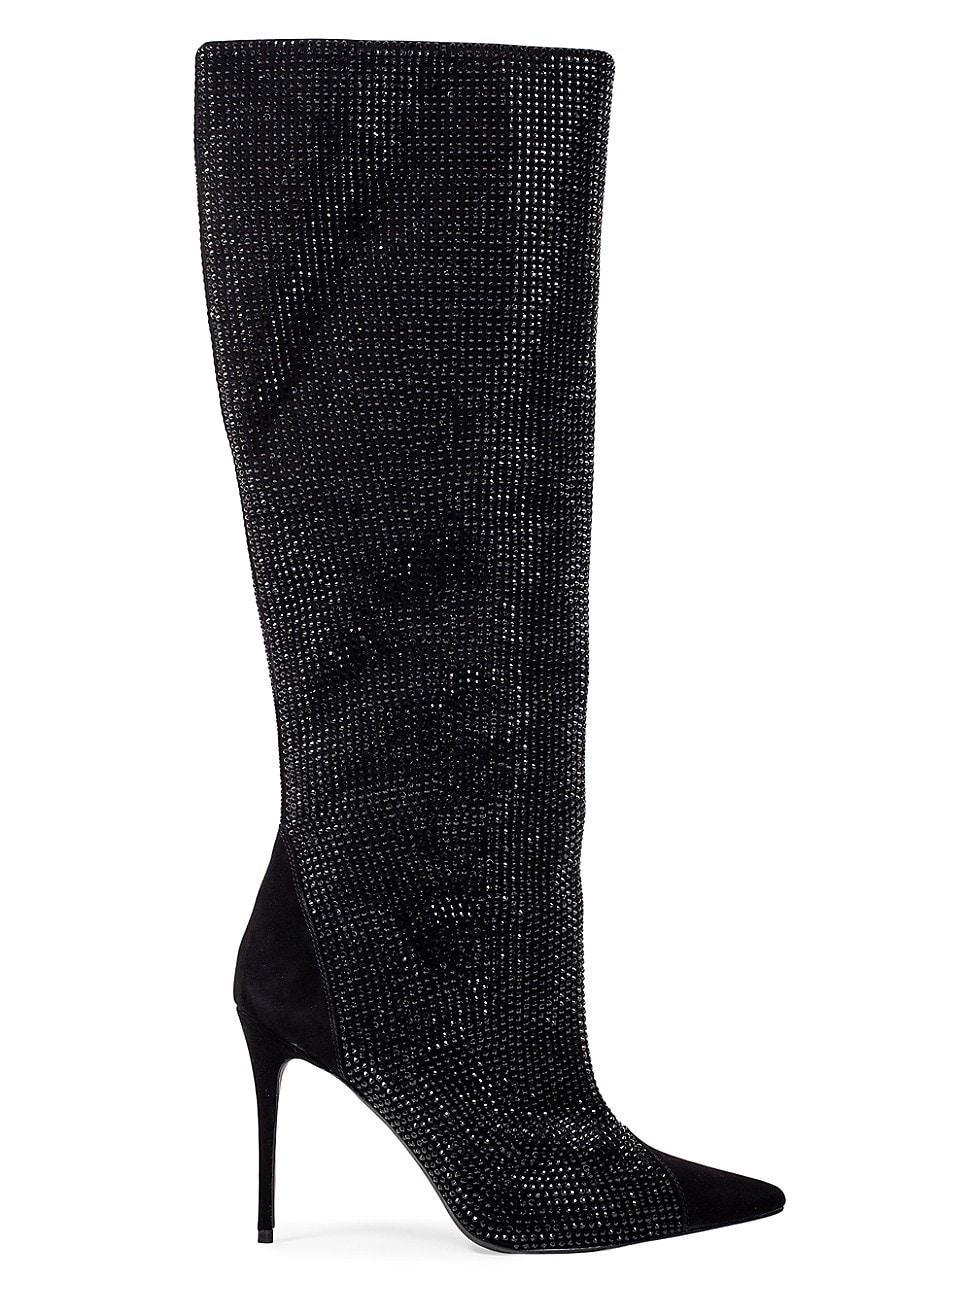 Womens Emerson Embellished Suede Boots Product Image